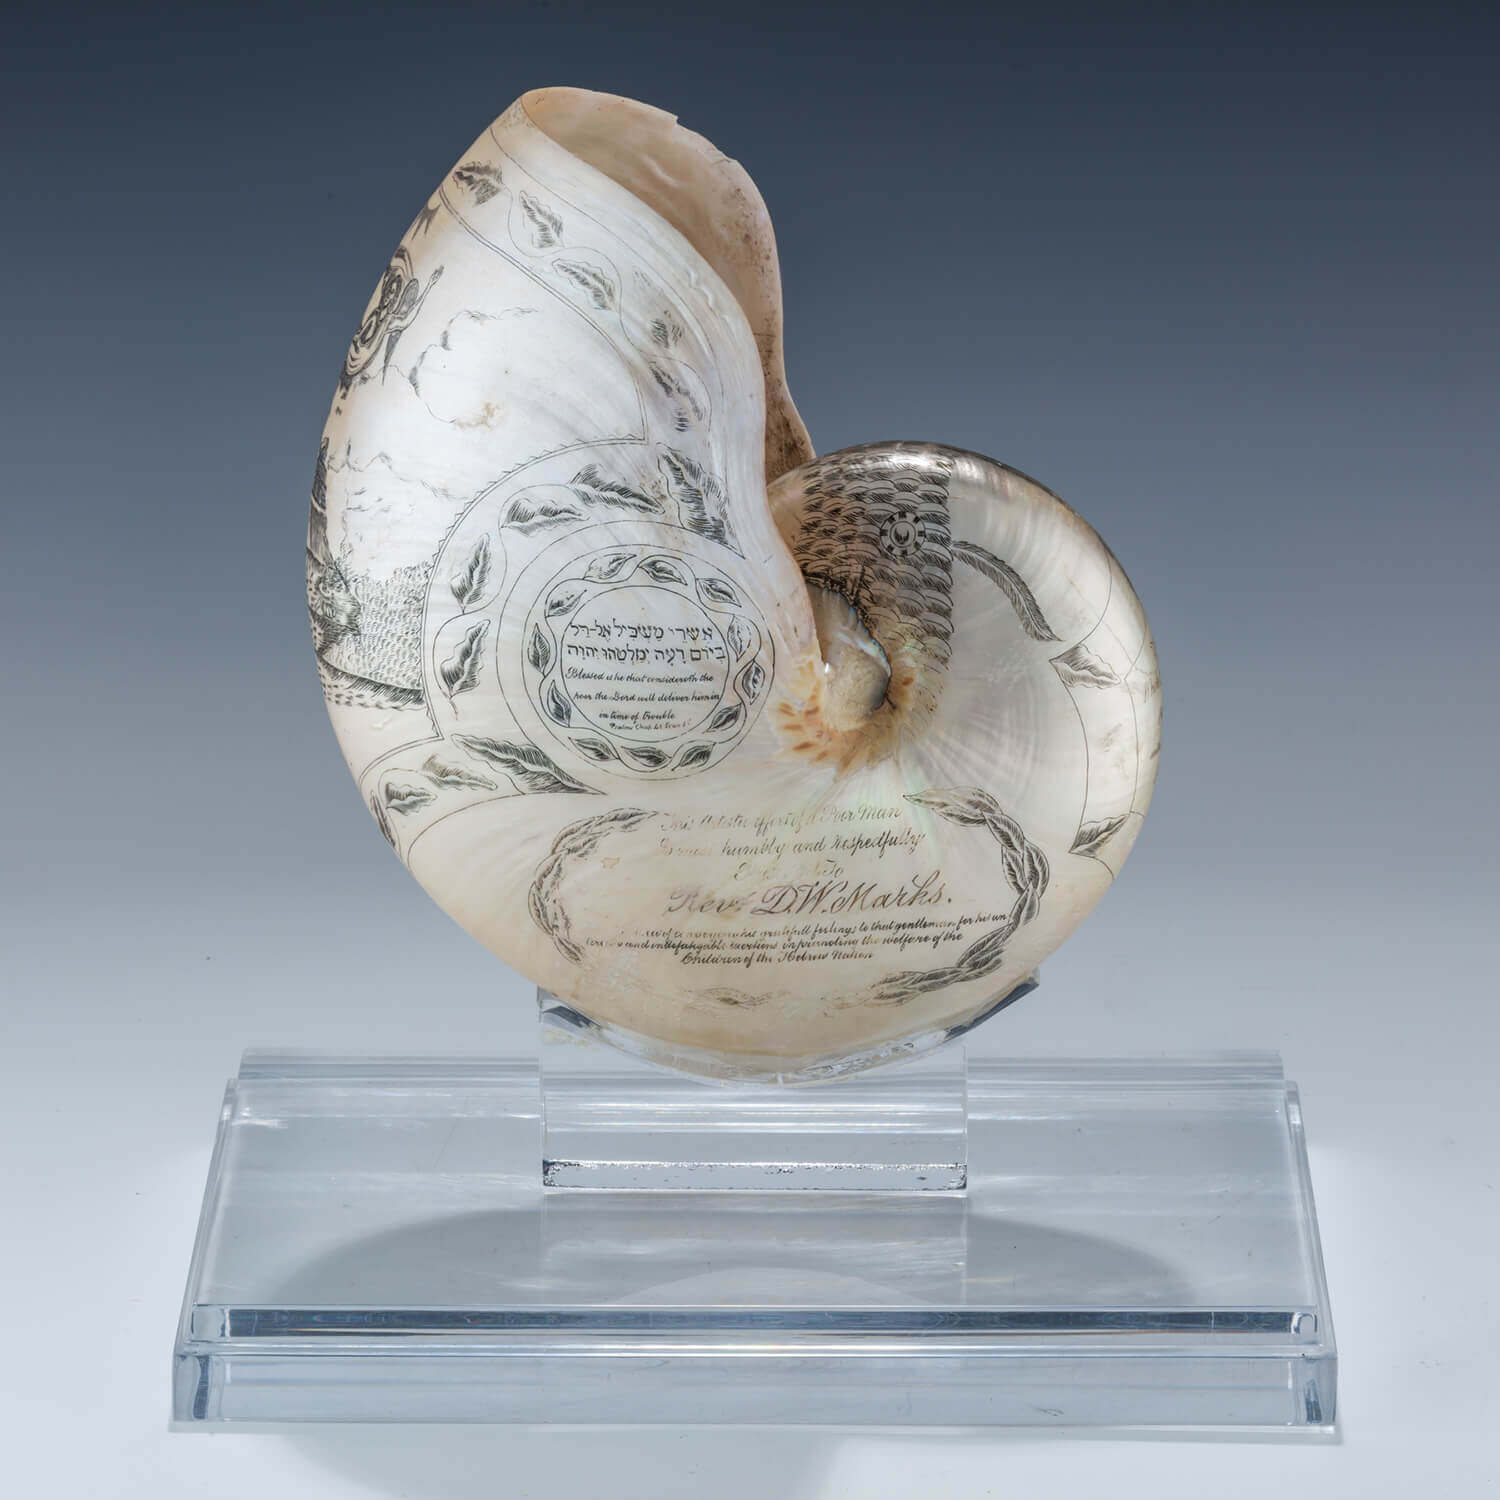 107. A RARE AND IMPORTANT DECORATED NAUTILUS SHELL